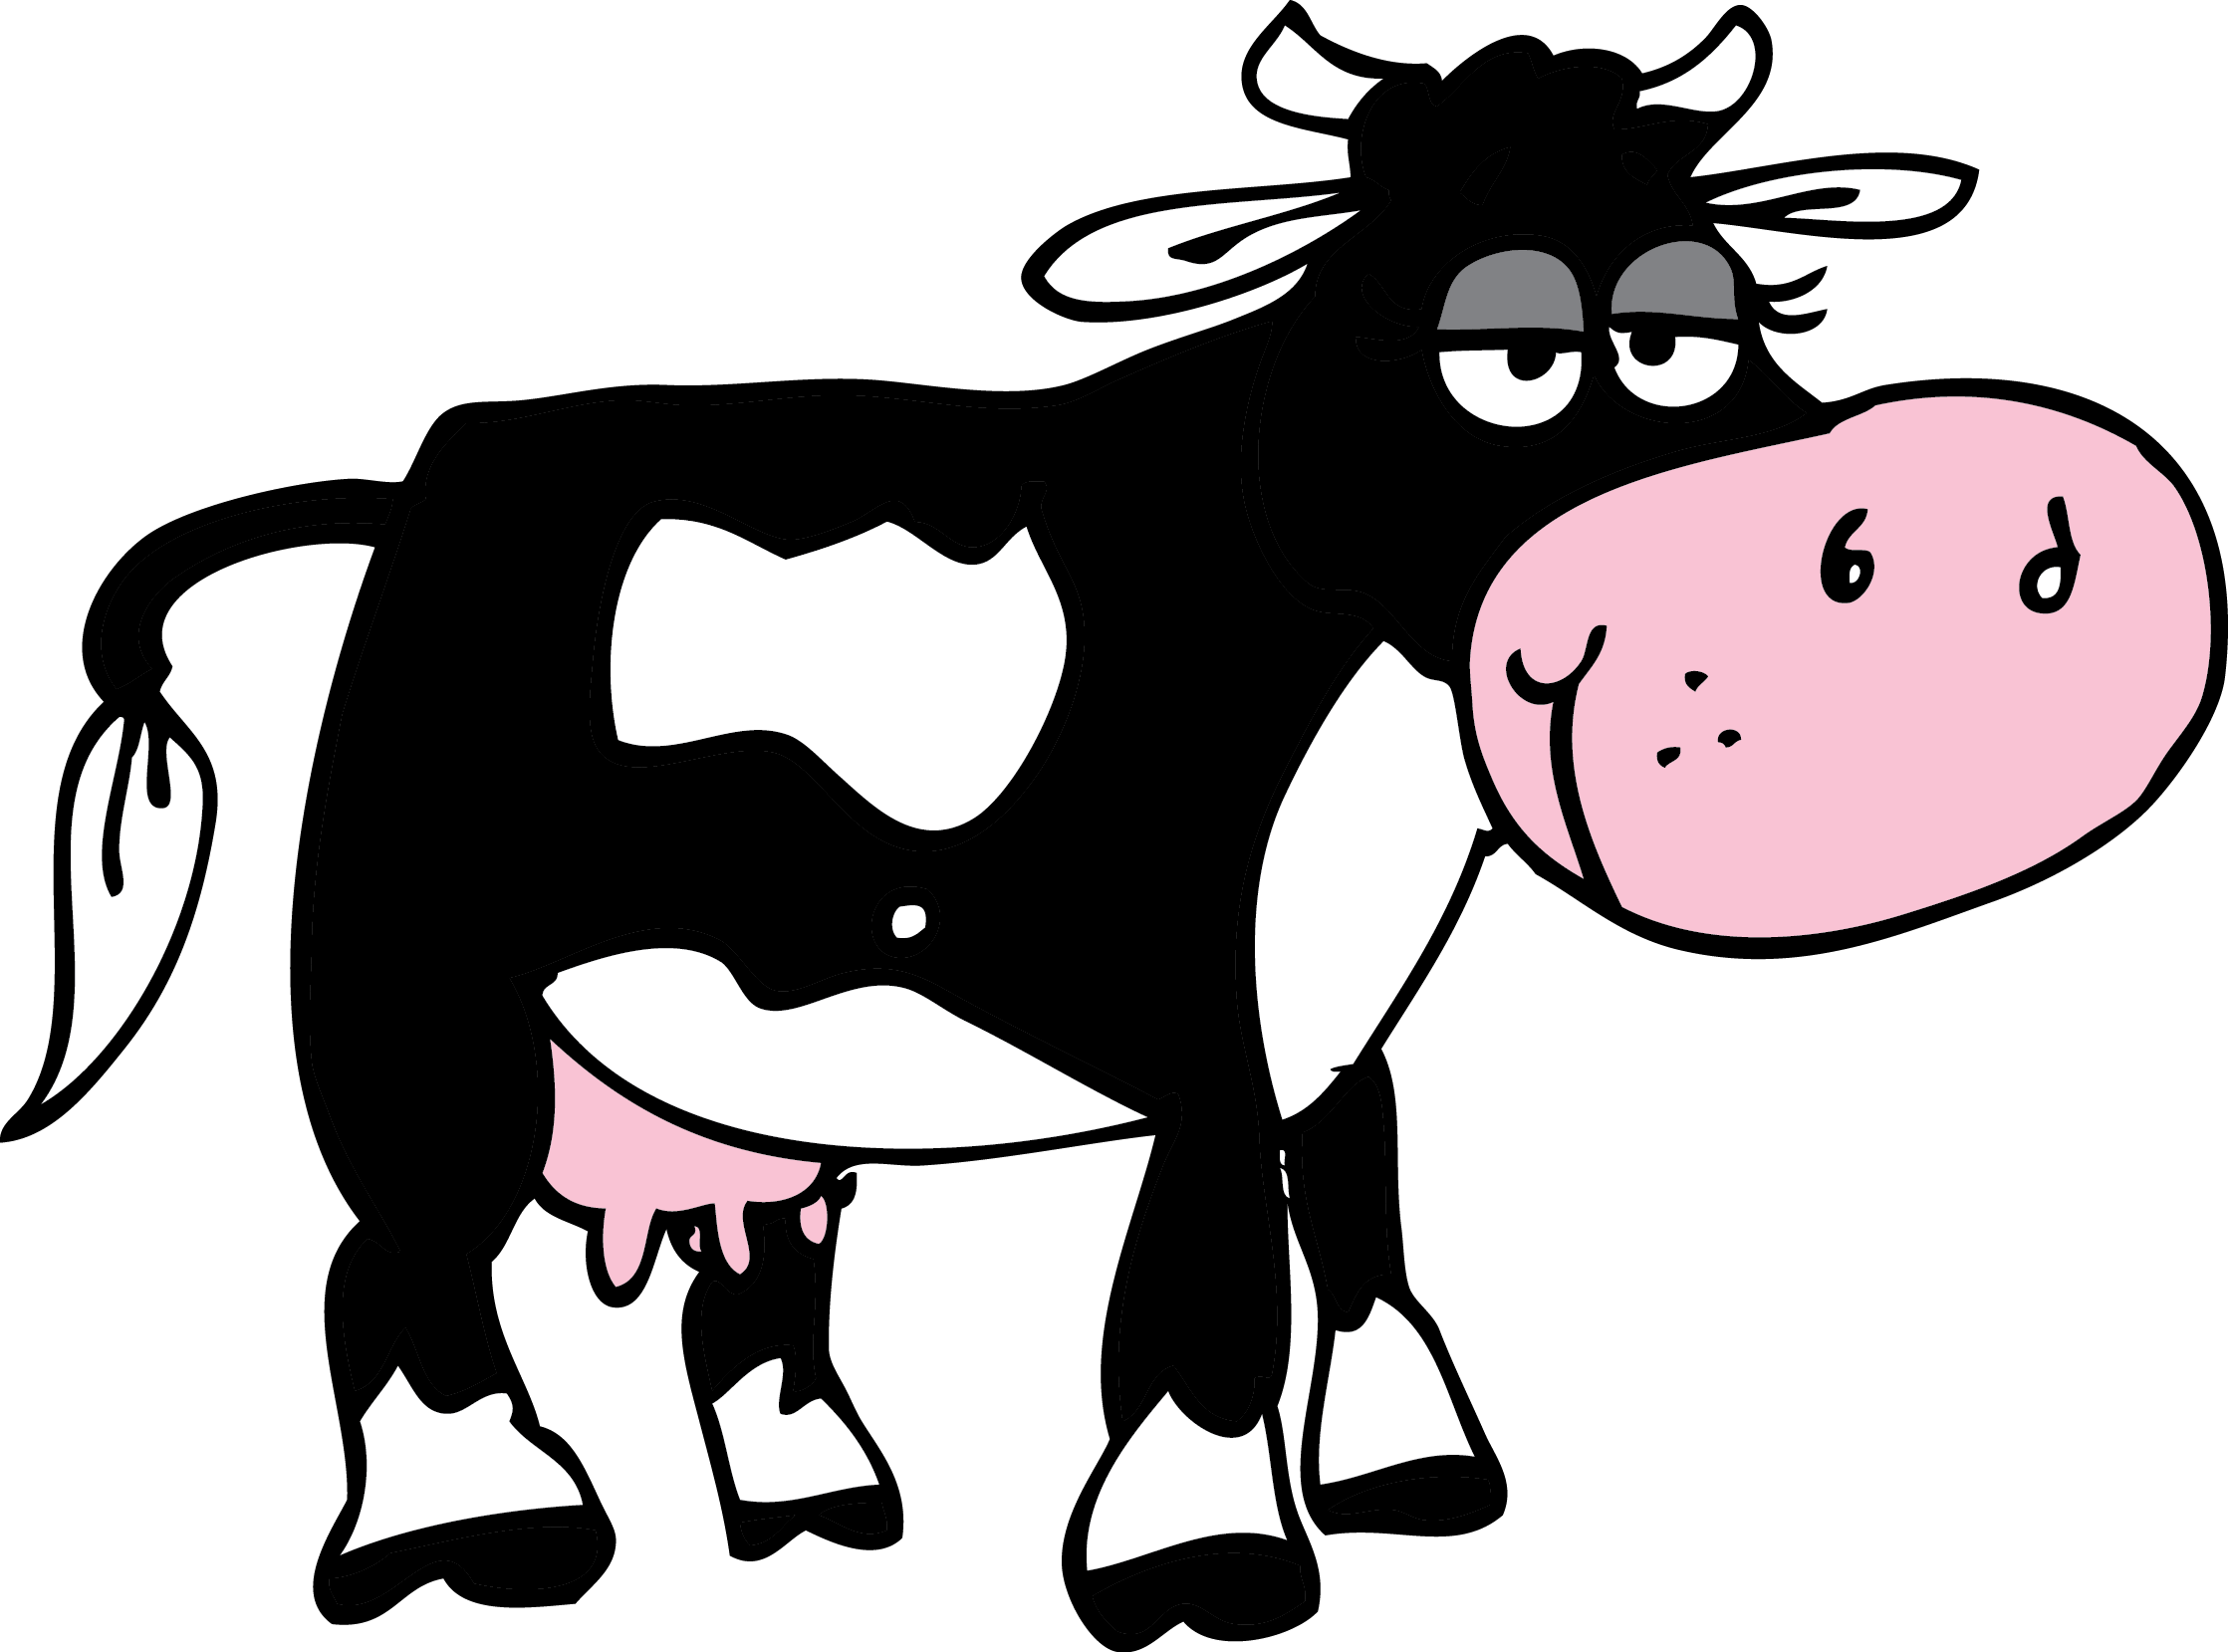 Cartoon jumping images pictures. Clipart grass cow